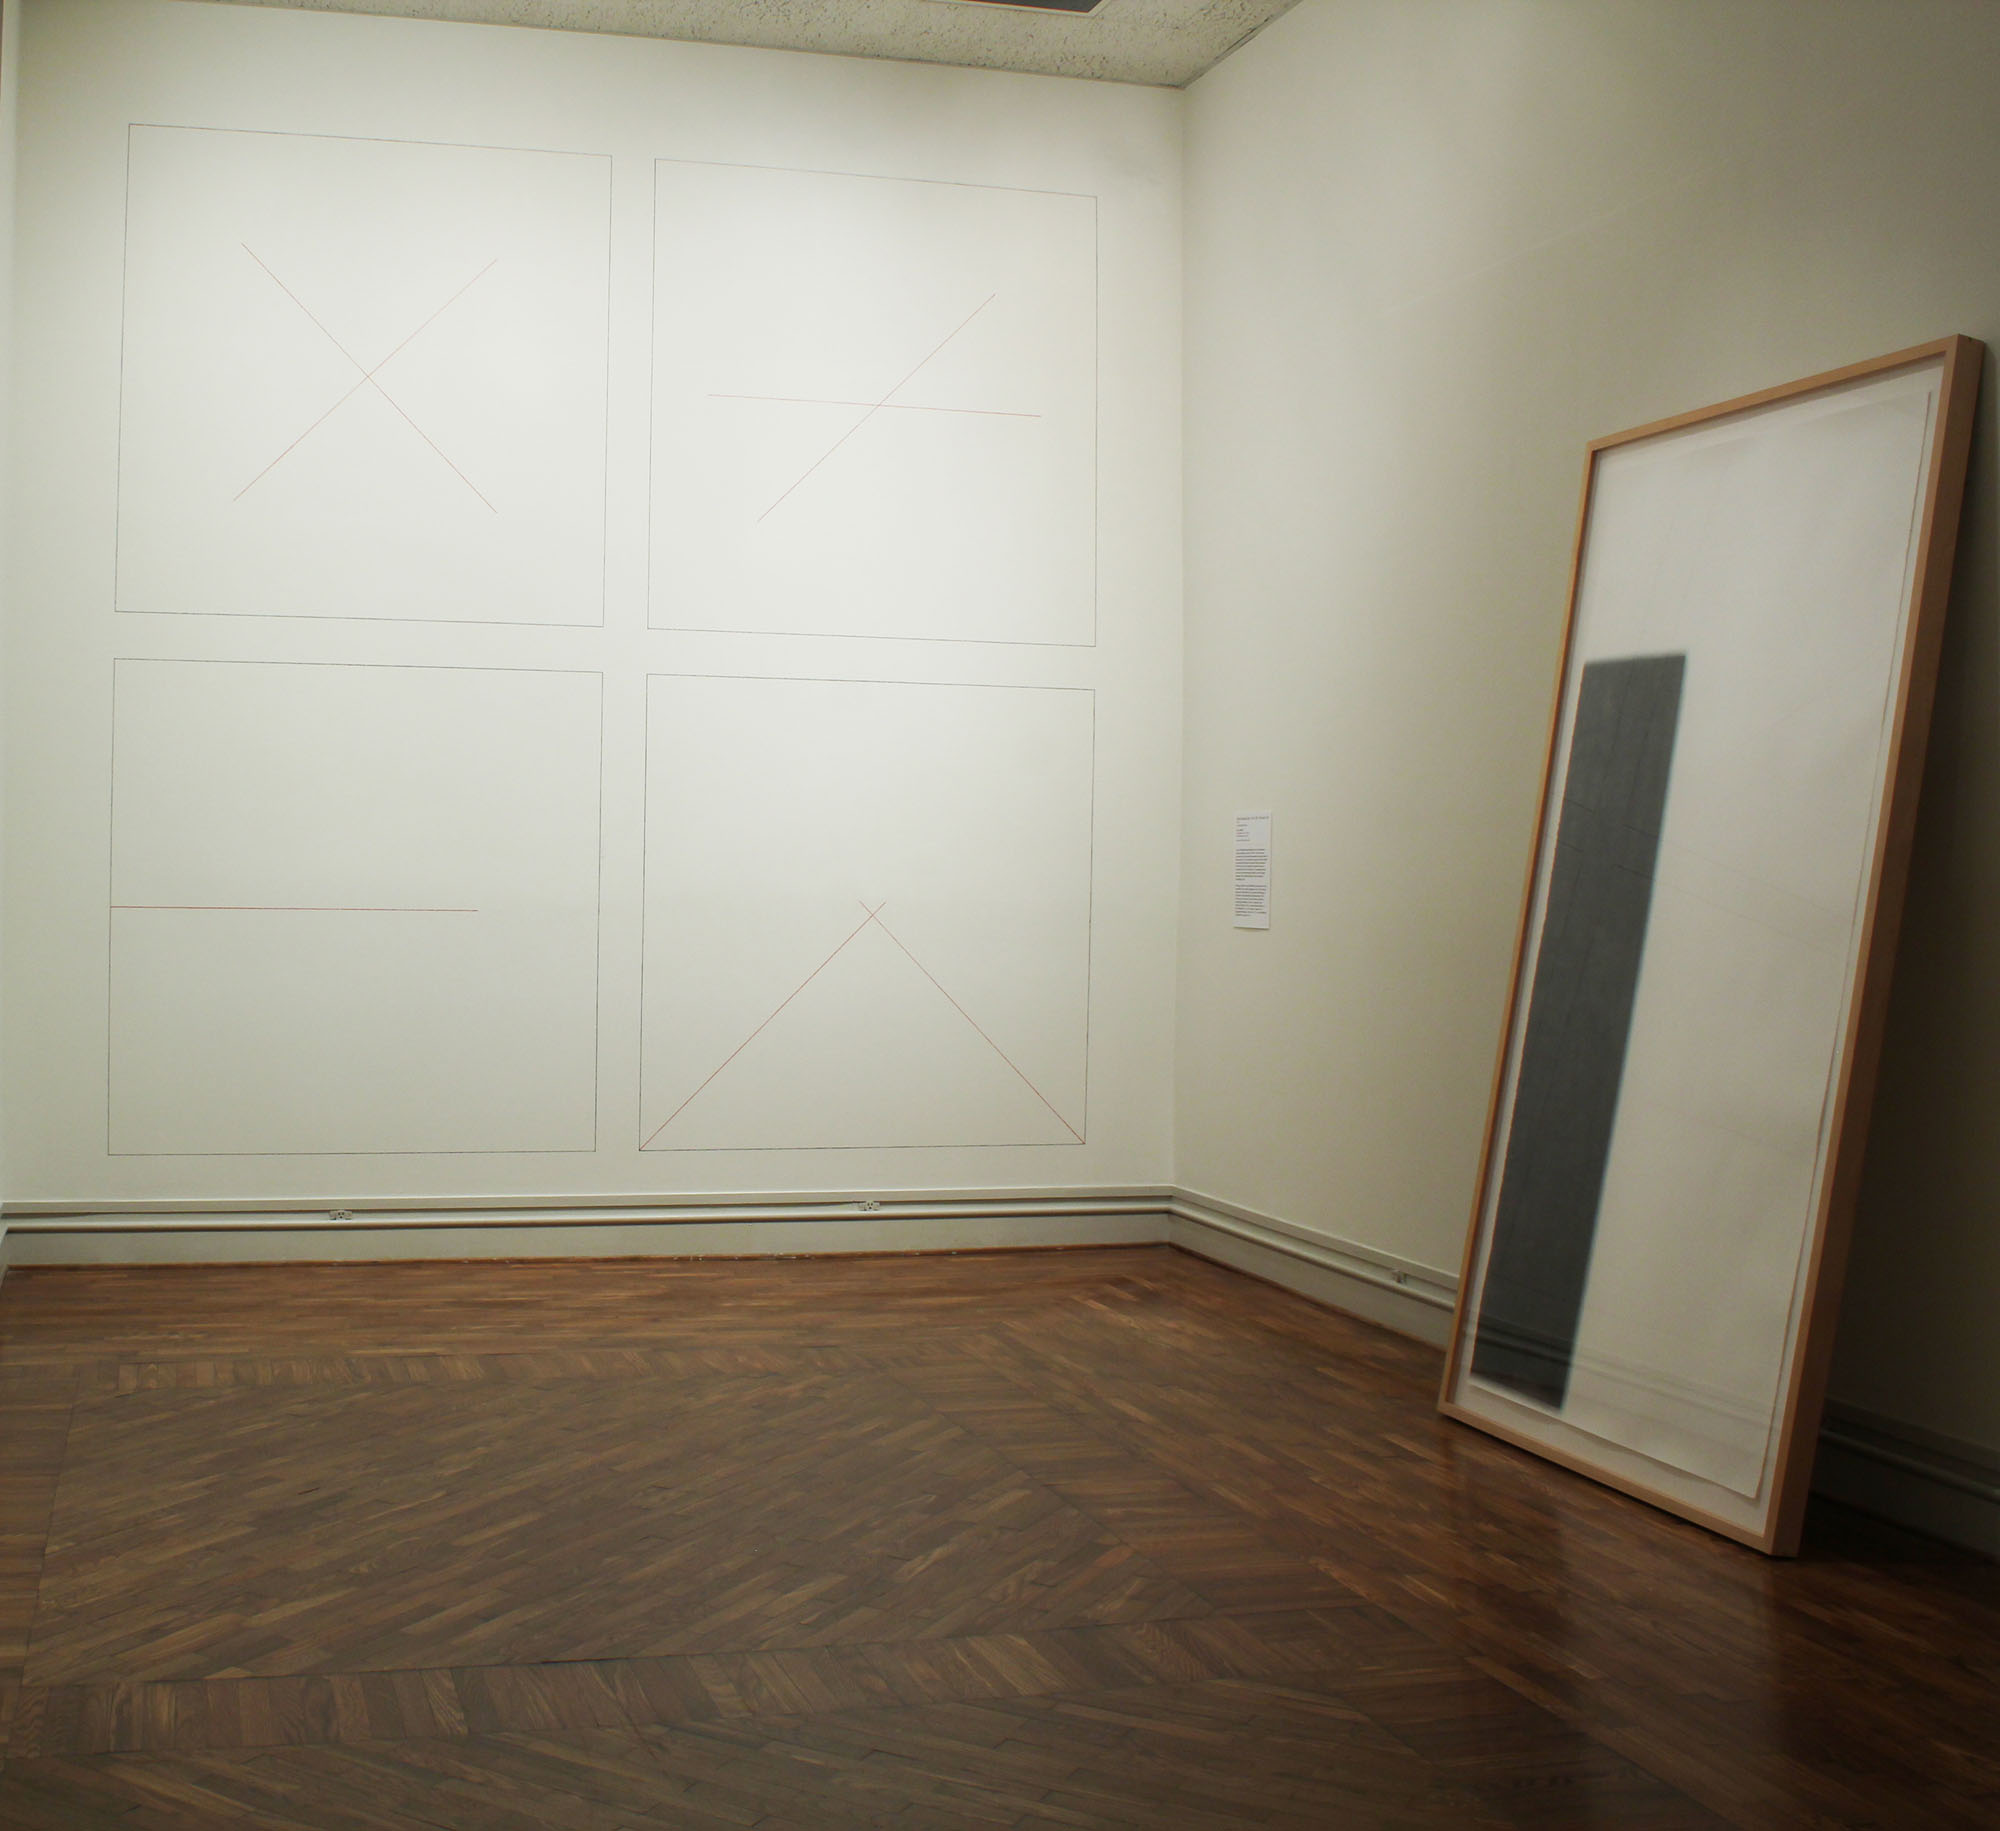   Beyond the Grid/ Into the Sublime, A New View on Minimalism (installation view, 2014)  Susan York, Tilted Column (right), 2008, graphite pencil on paper,&nbsp;8’ x 4’ x 2” (framed)  Sol LeWitt,  Wall Drawing series (left) 